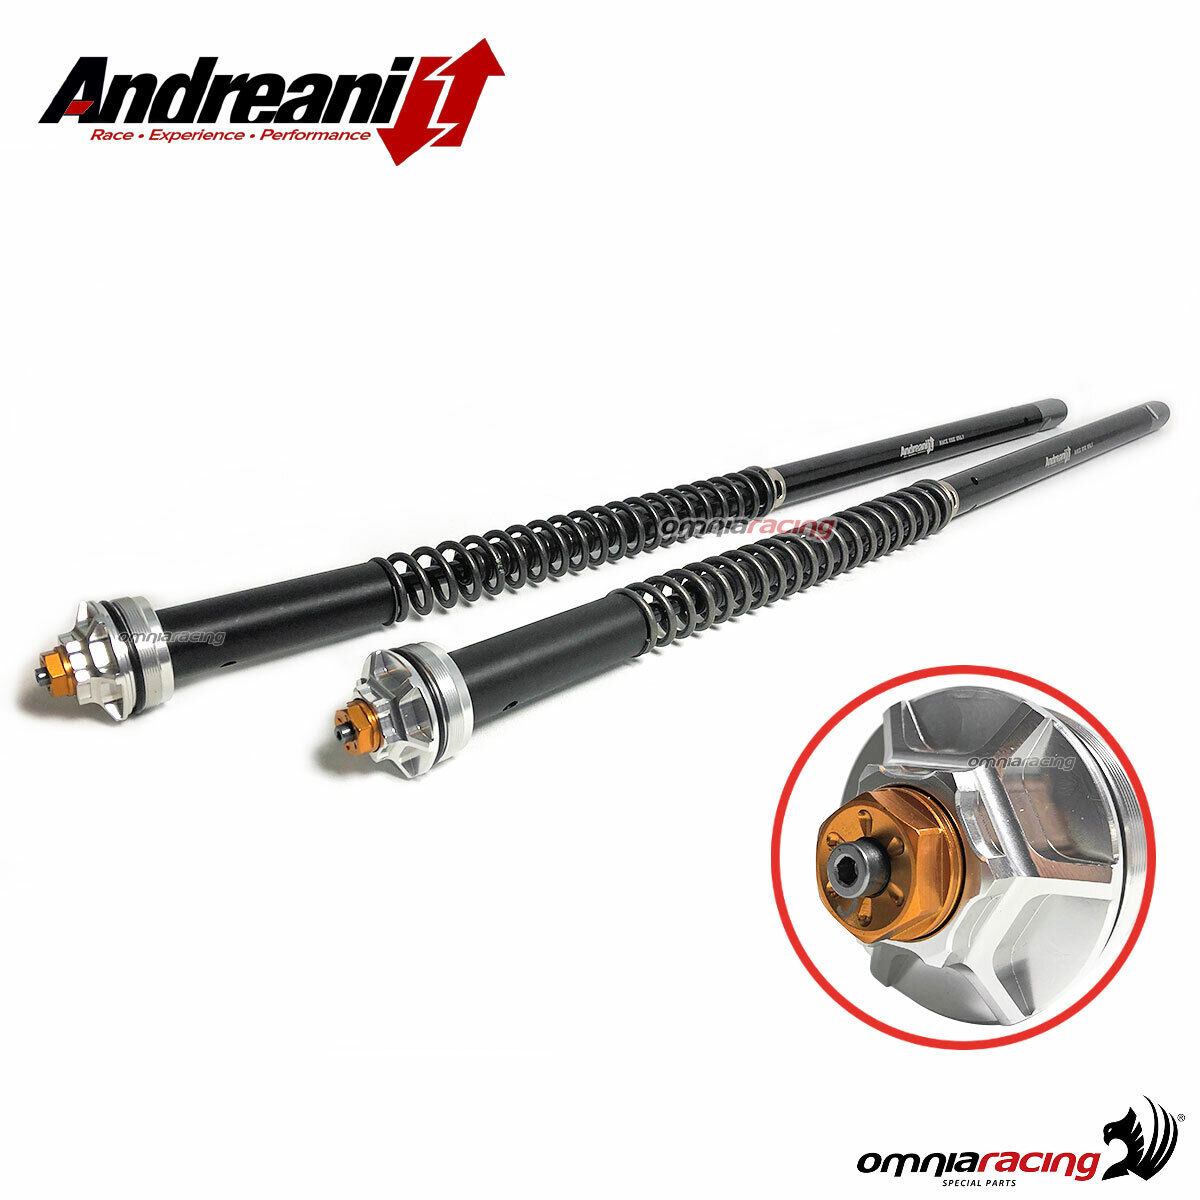 Andreani Misano Evo cartridges for 45 off-r BMW Marzocchi Our shop most popular F800GS Many popular brands